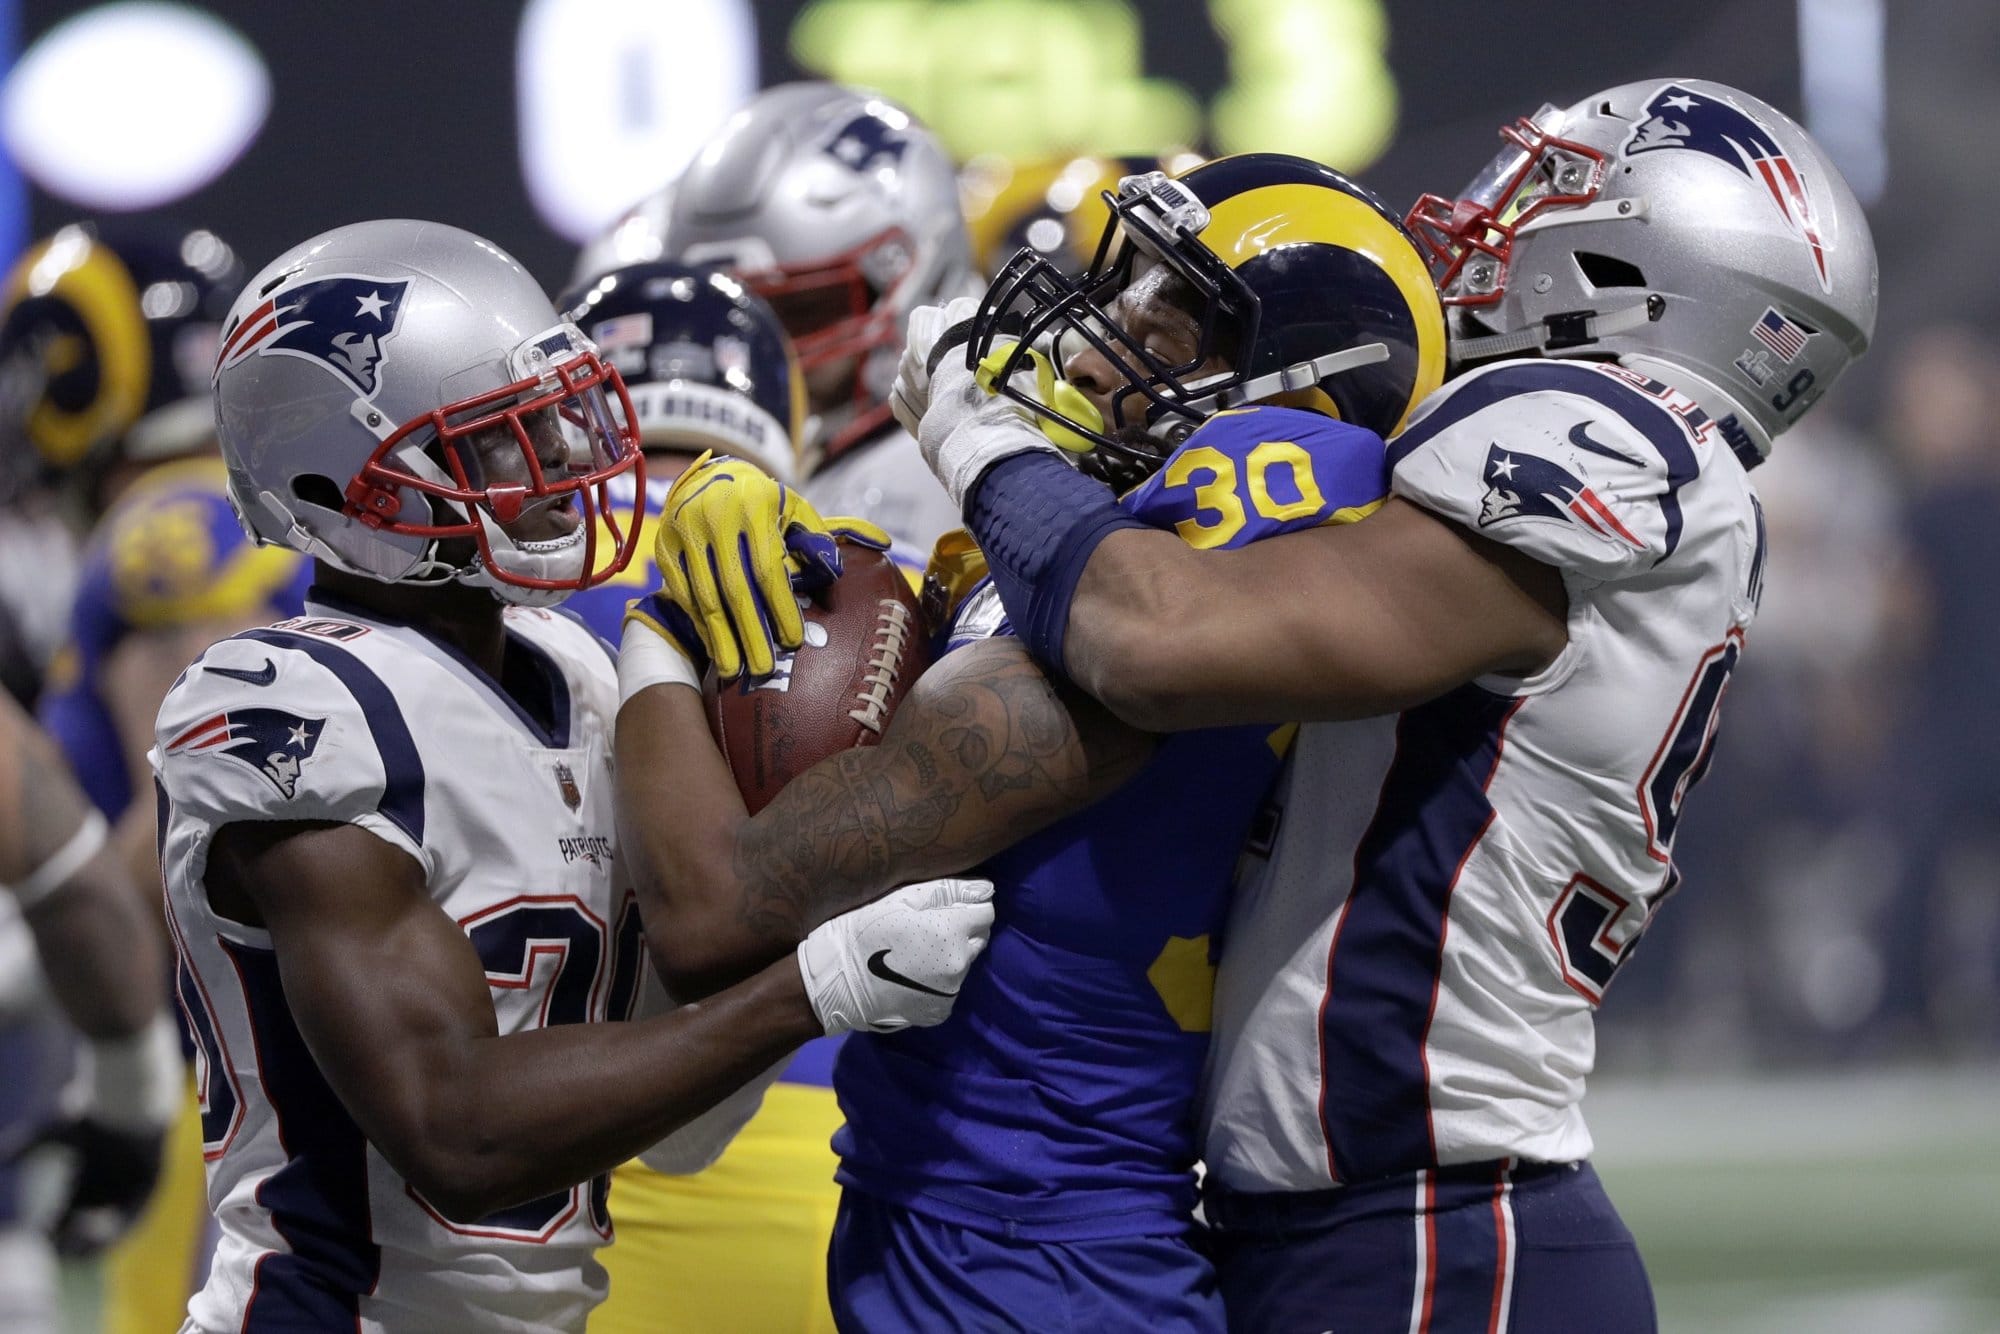 Los Angeles Rams' Todd Gurley II (30) is tackled by New England Patriots' Jason McCourty, left, and Deatrich Wise Jr., right, during the second half of the NFL Super Bowl 53 football game Sunday, Feb. 3, 2019, in Atlanta. (AP Photo/David J. Phillip)